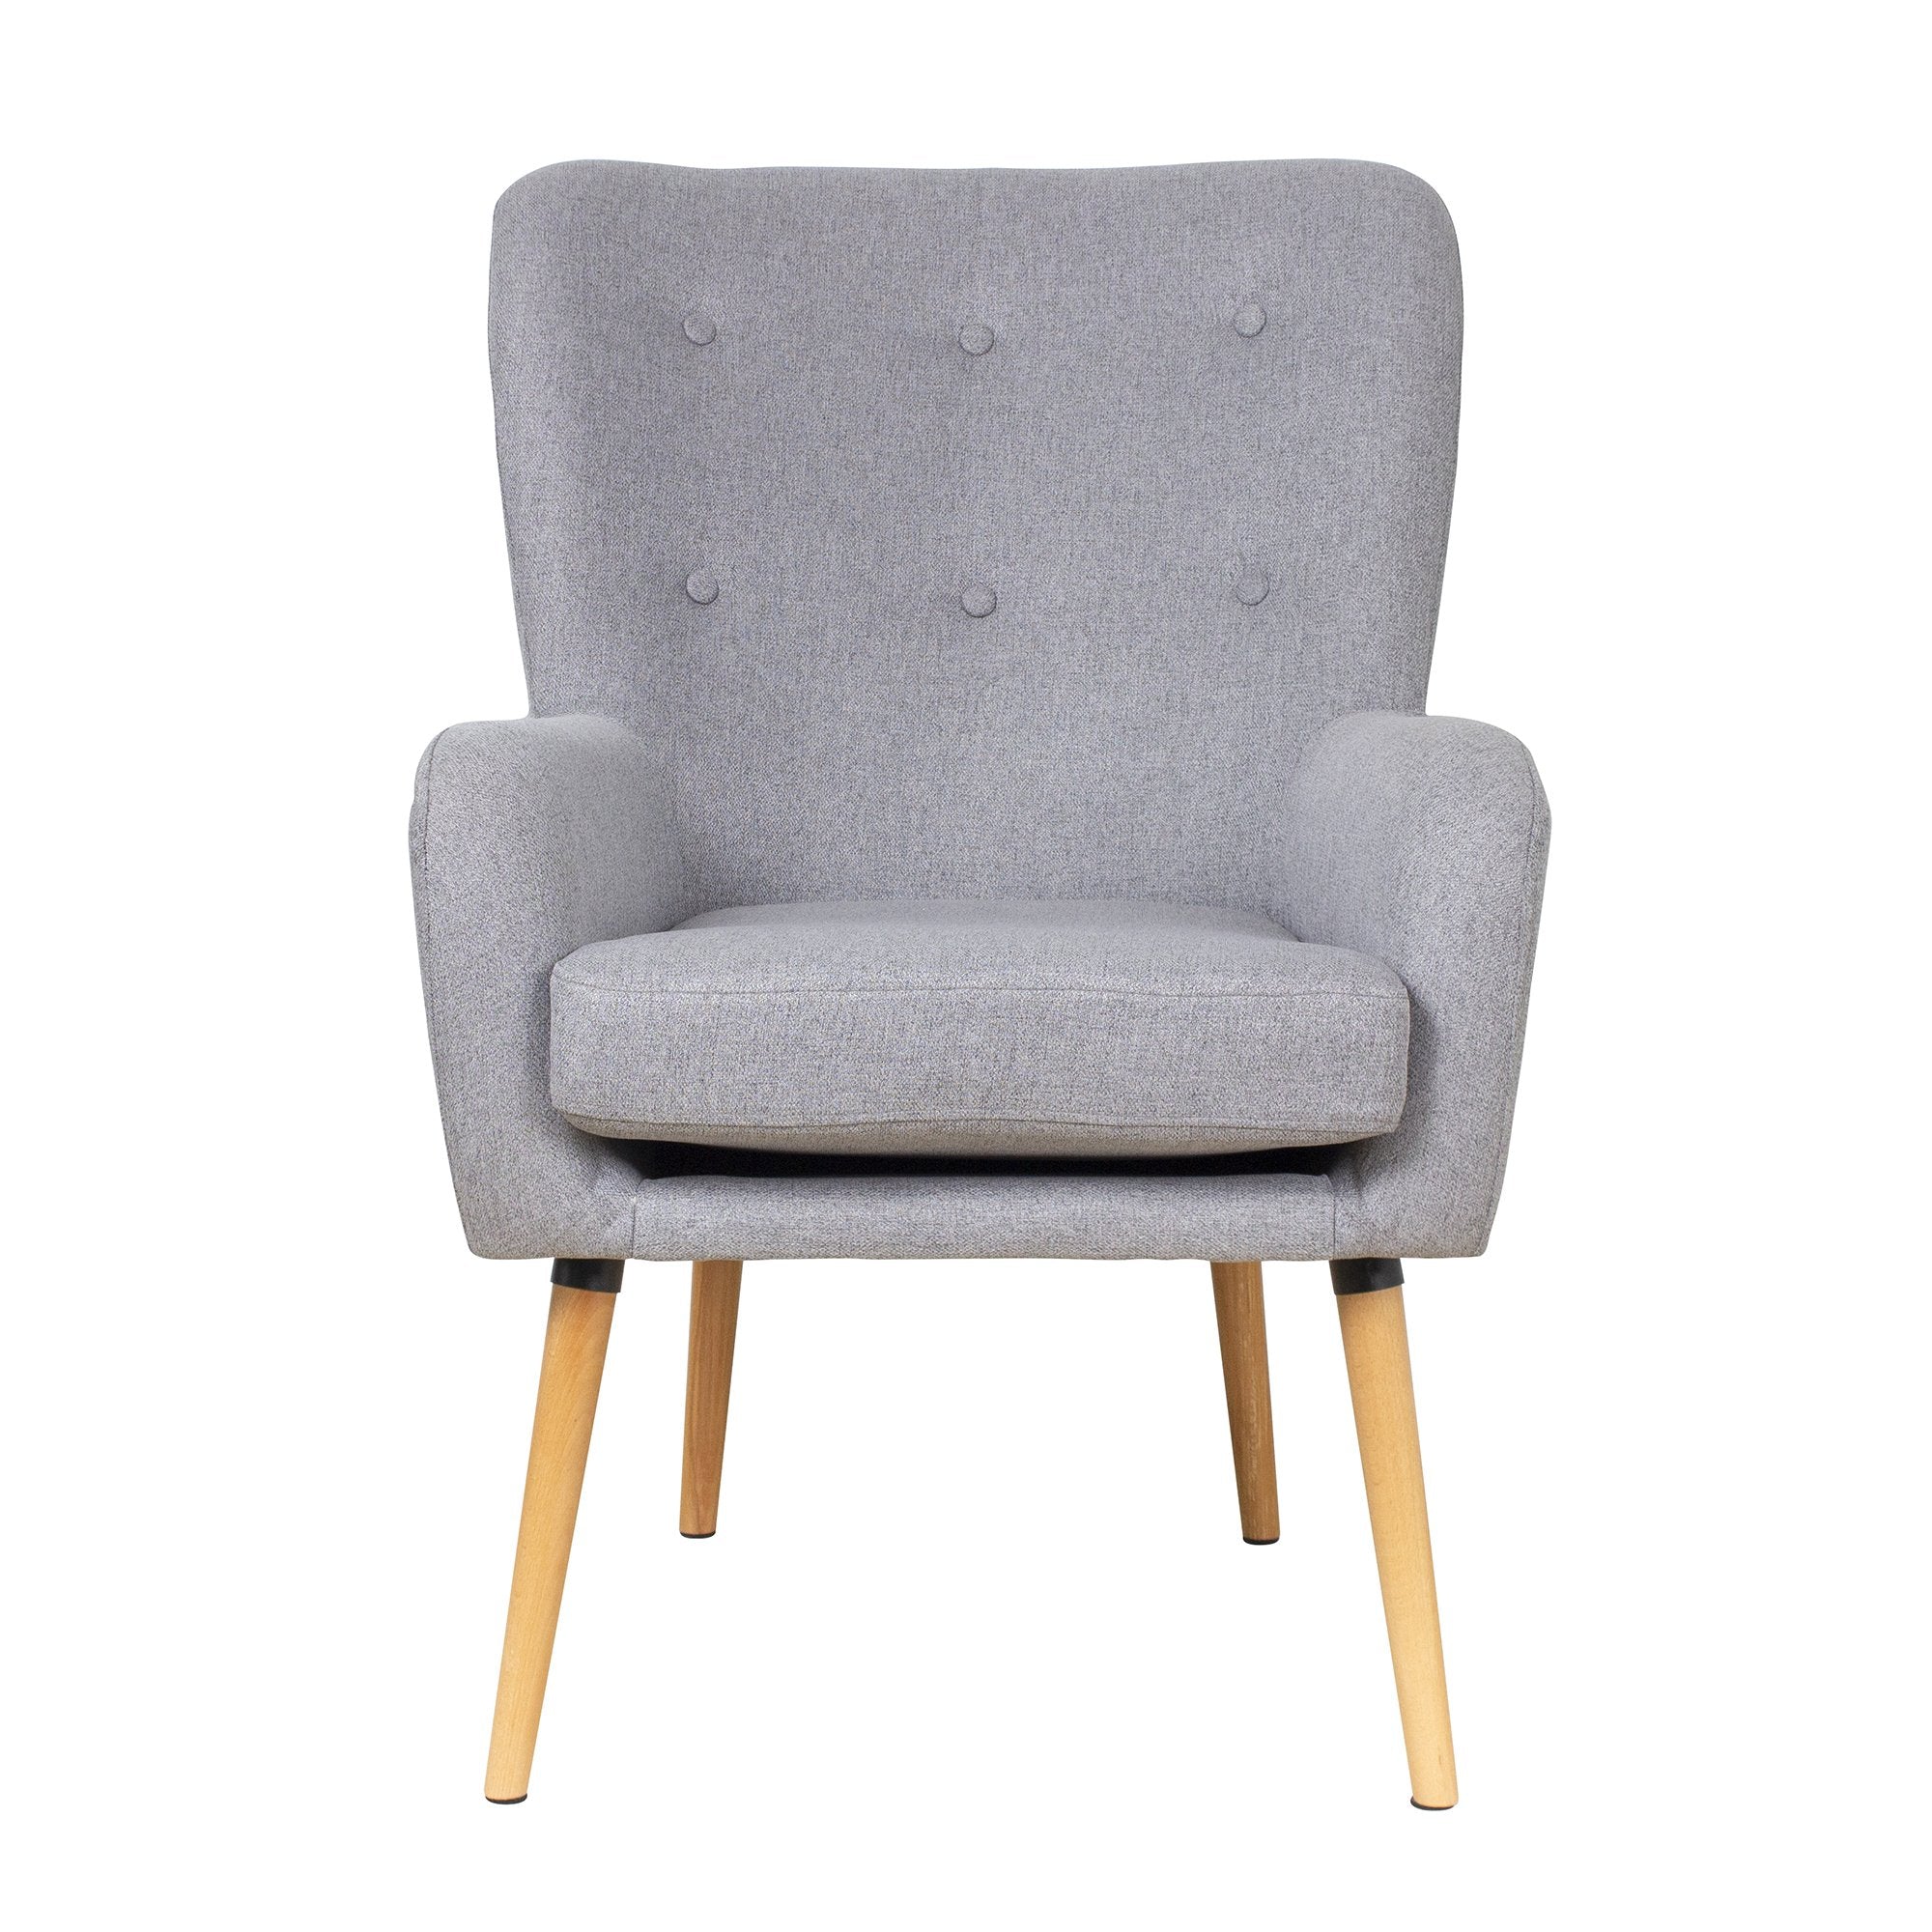 Contemporary Stylish Button-Tufted Upholstered Accent Armchair with Wood Legs